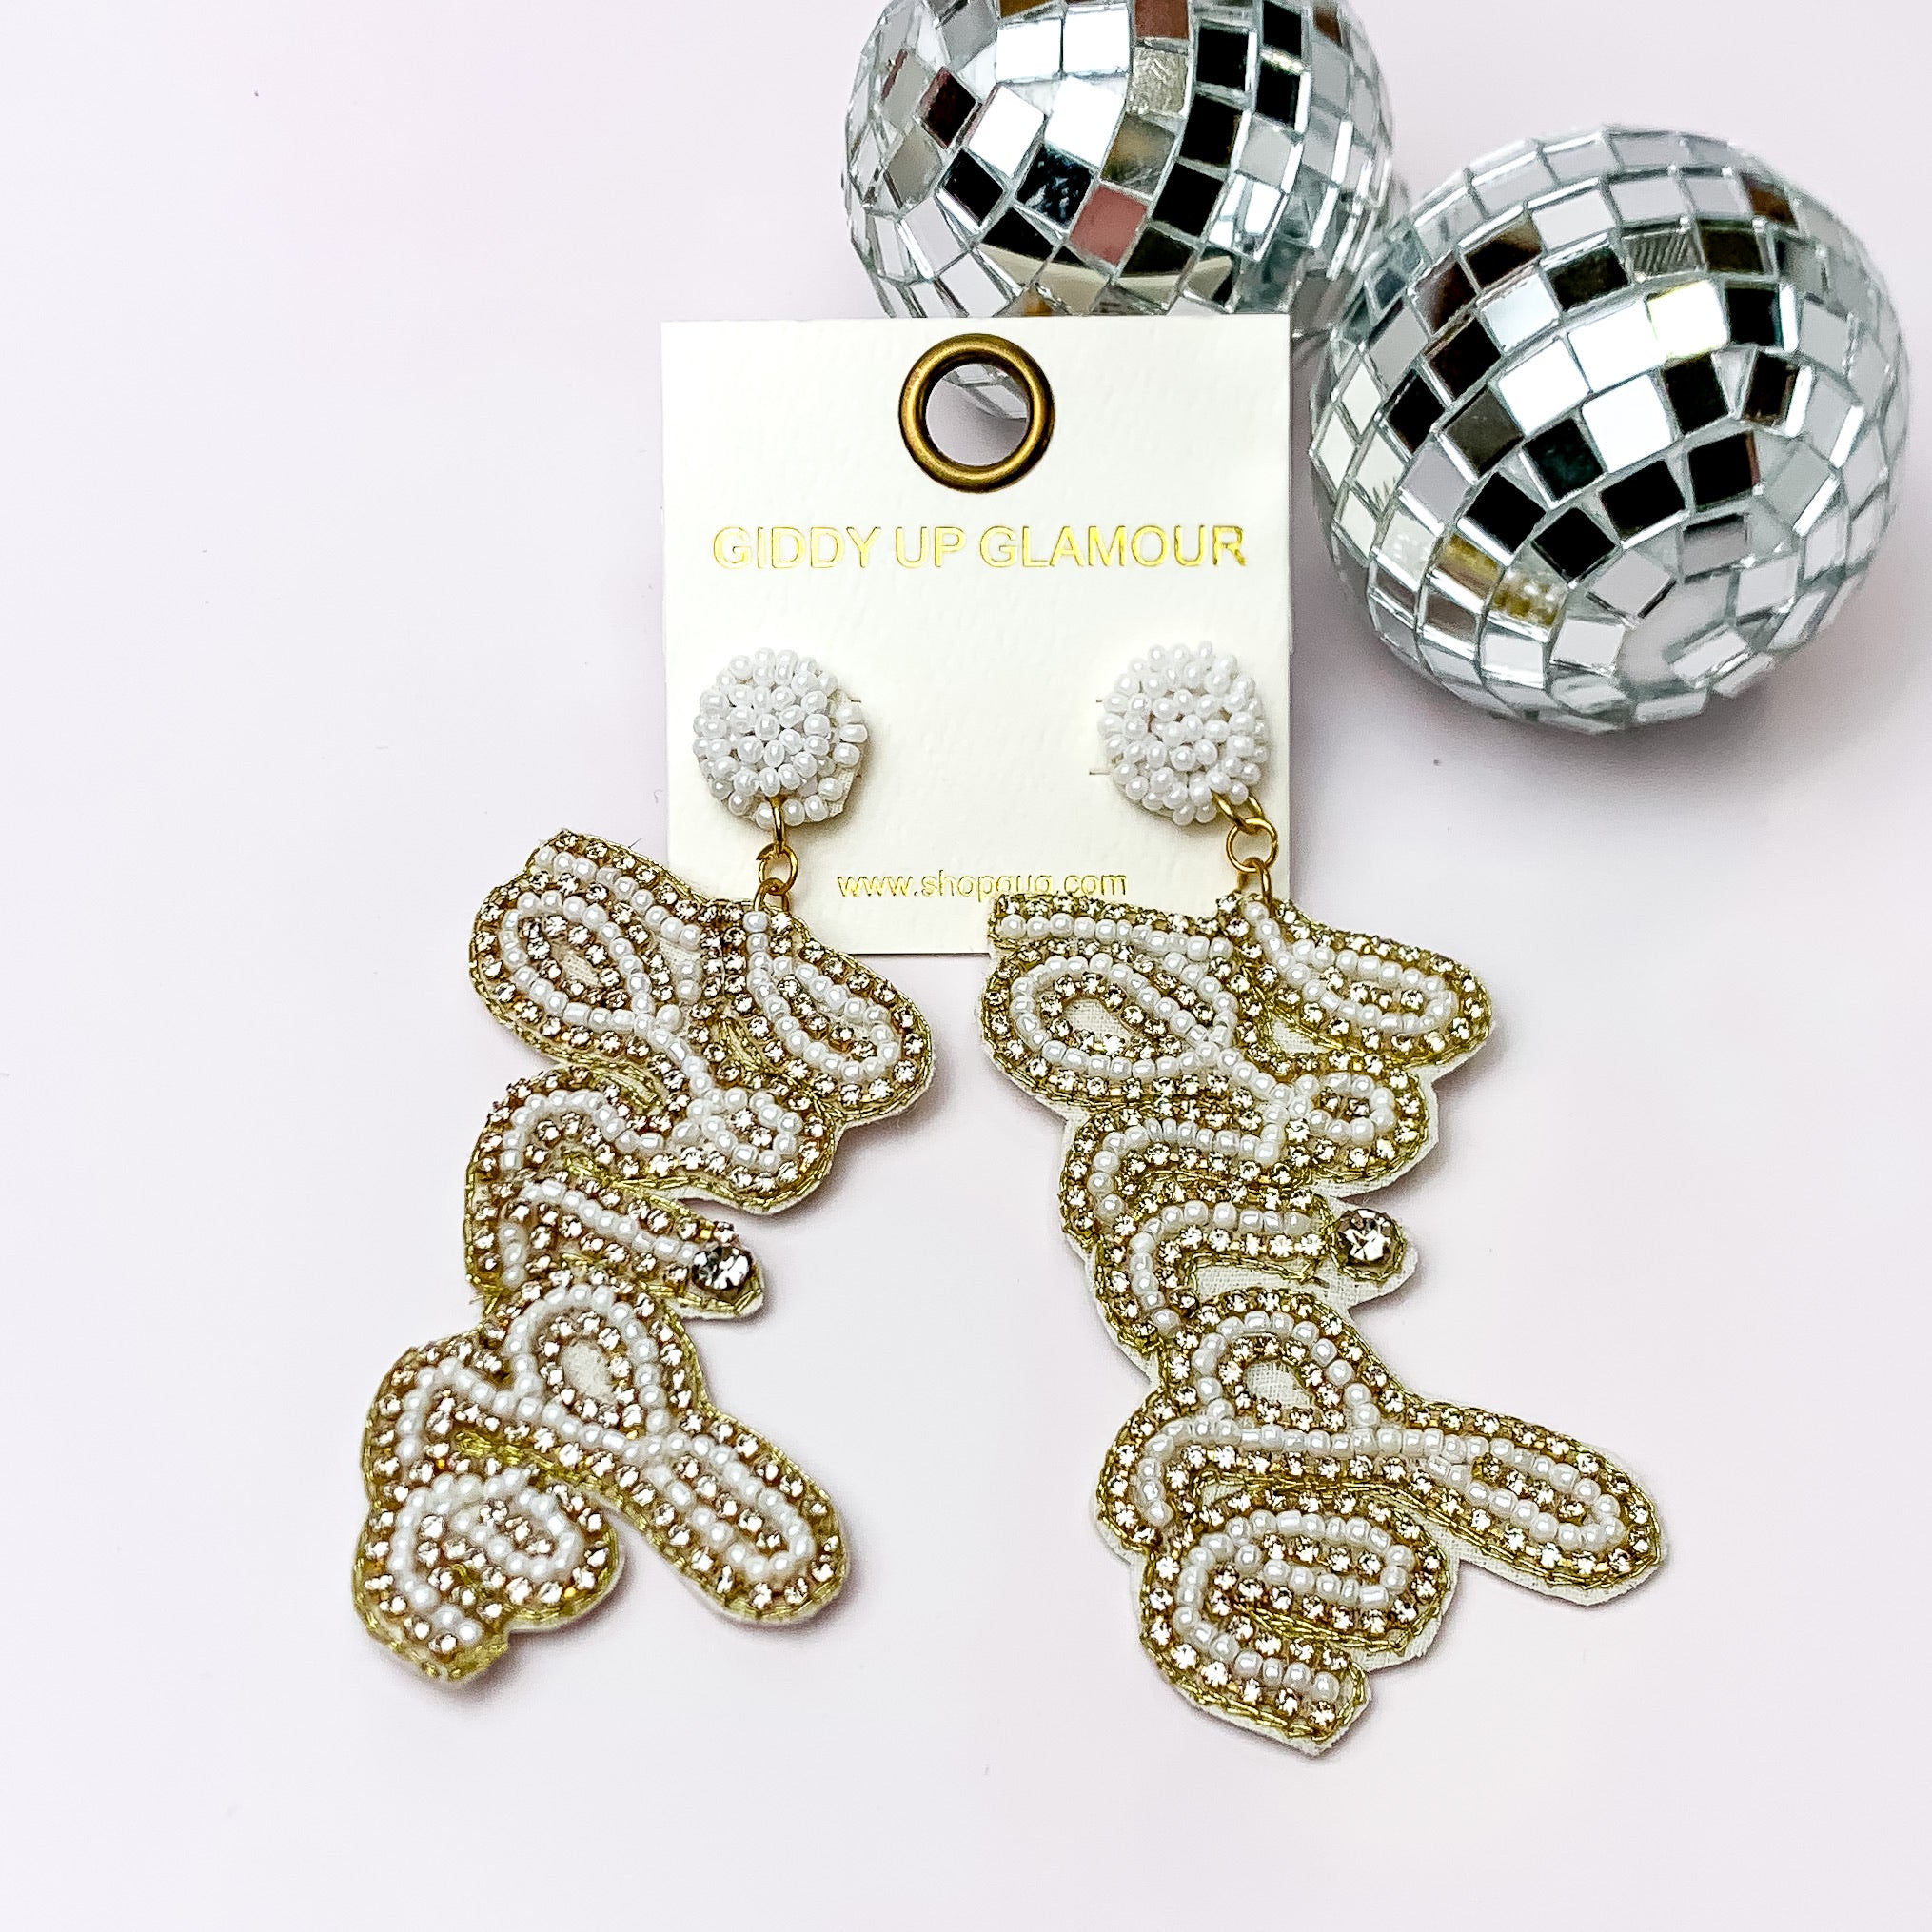 Beaded Bride Earrings with Clear Crystals in Gold, and White. Pictured on a white background with disco balls in the top left.